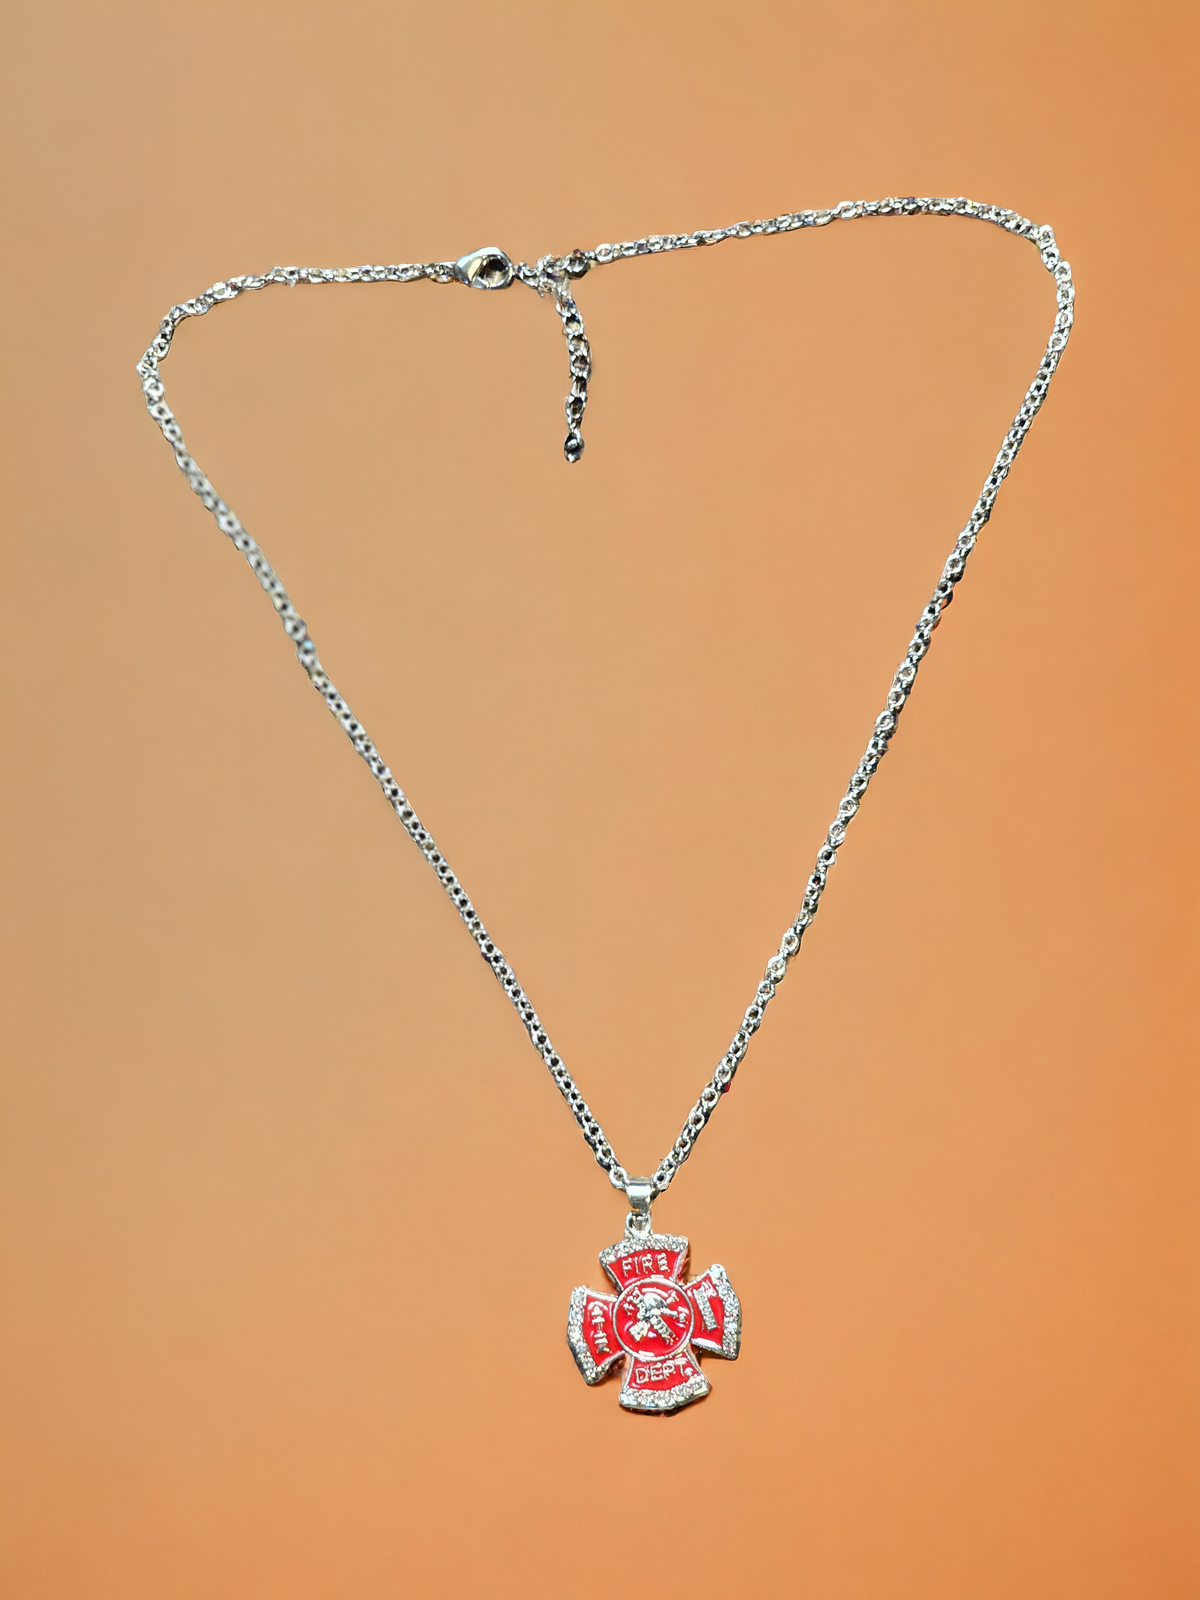 Fire Department Necklace - Red Enamel Maltese Cross Pendant with Rhinestones for Firefighter Appreciation